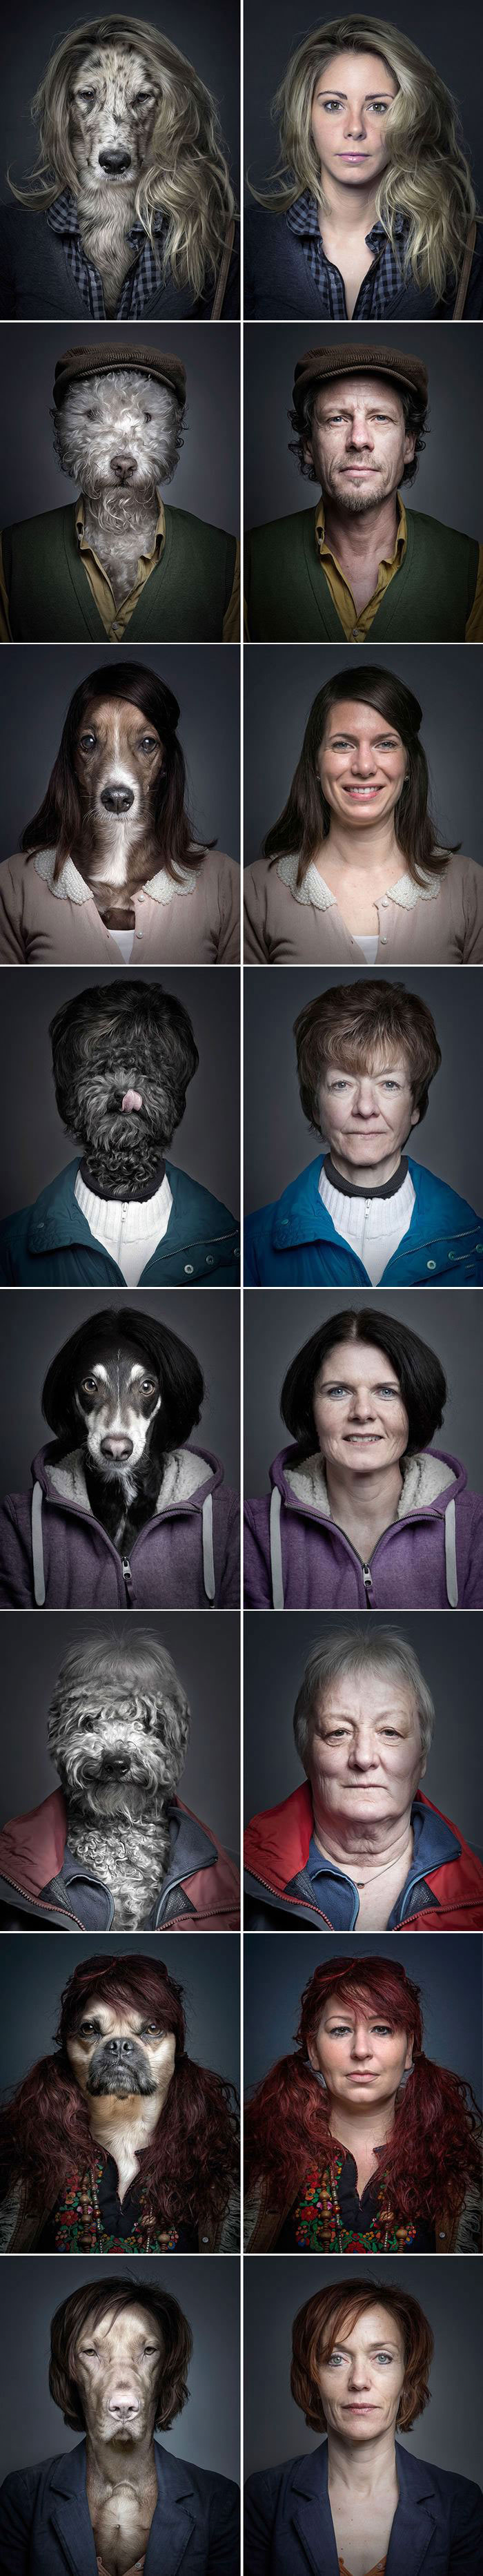 dogs, owners, totallylookslike, dressed the same